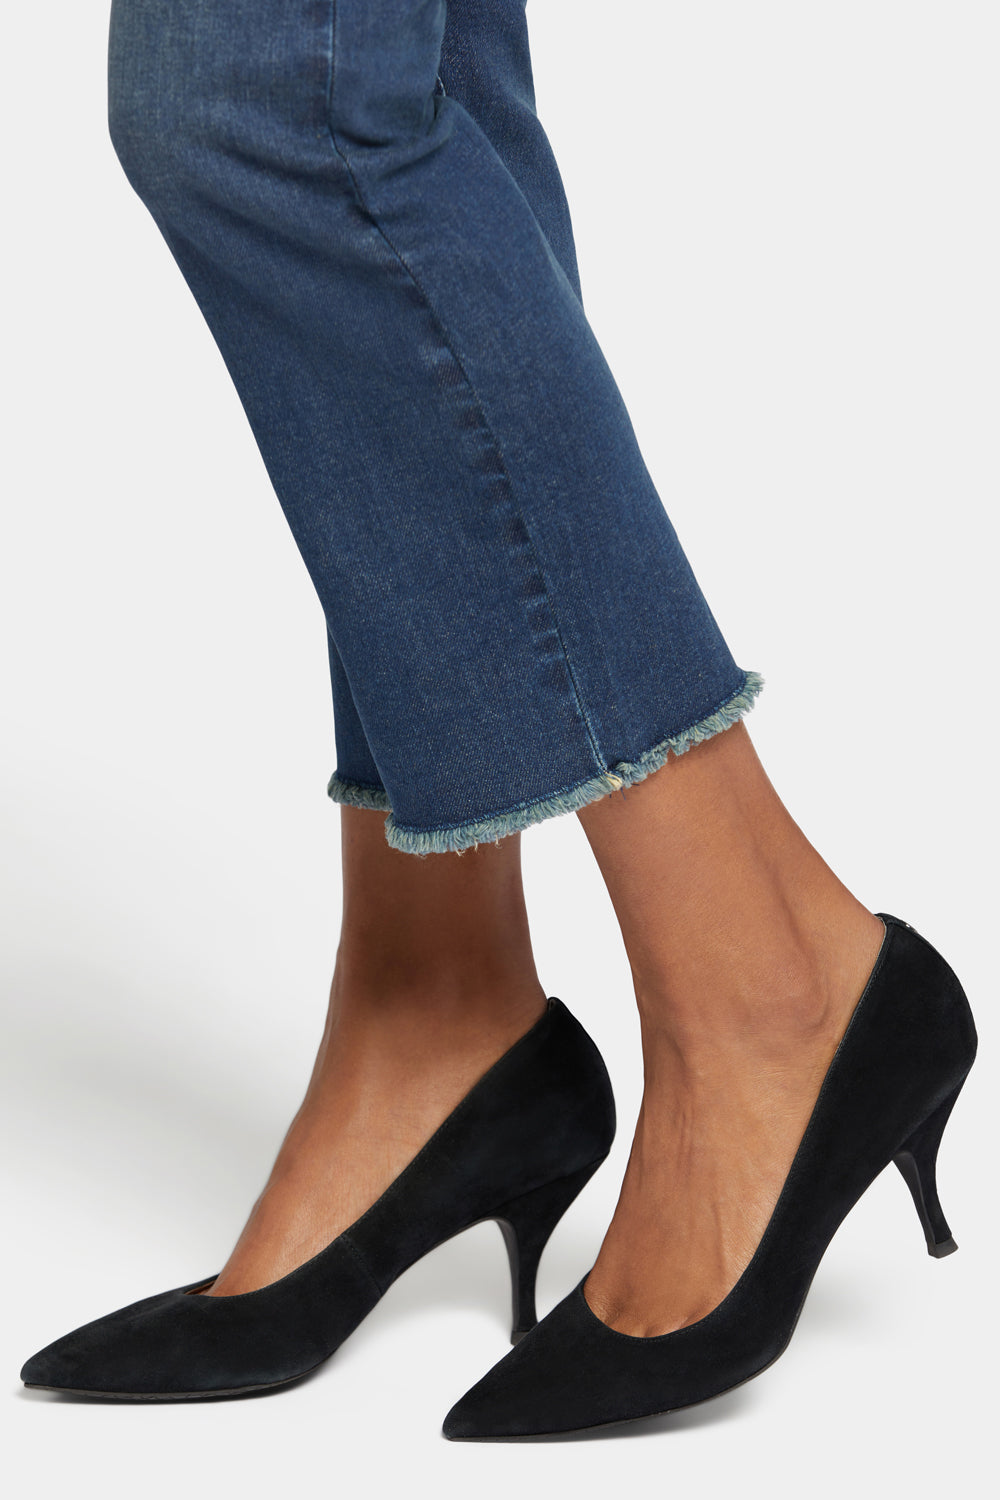 NYDJ Marilyn Straight Ankle Jeans With Double-Button Fly And Frayed Hems  - Precious